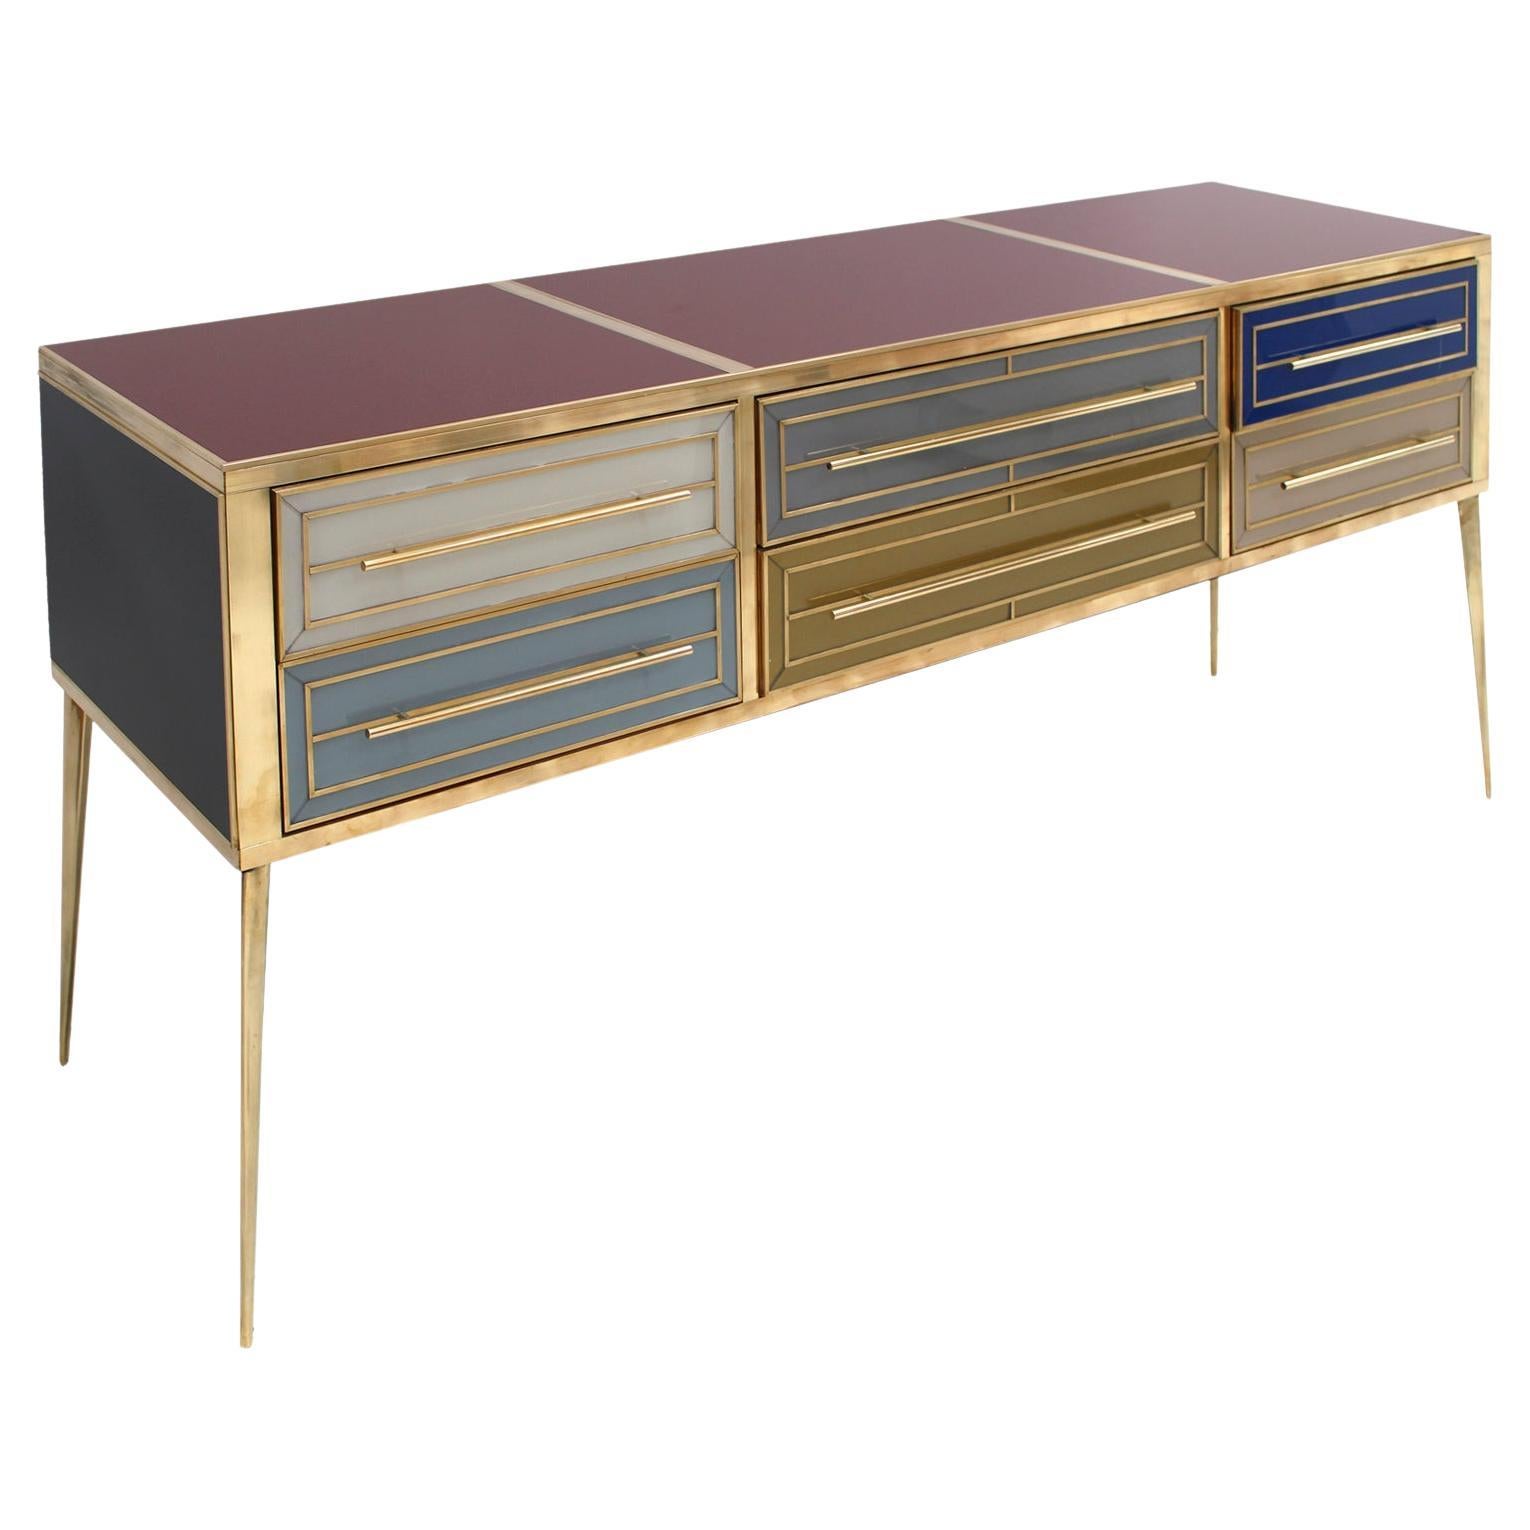 Italian Sideboard Made of Solid Wood and Covered with Colored Glass, 1950s